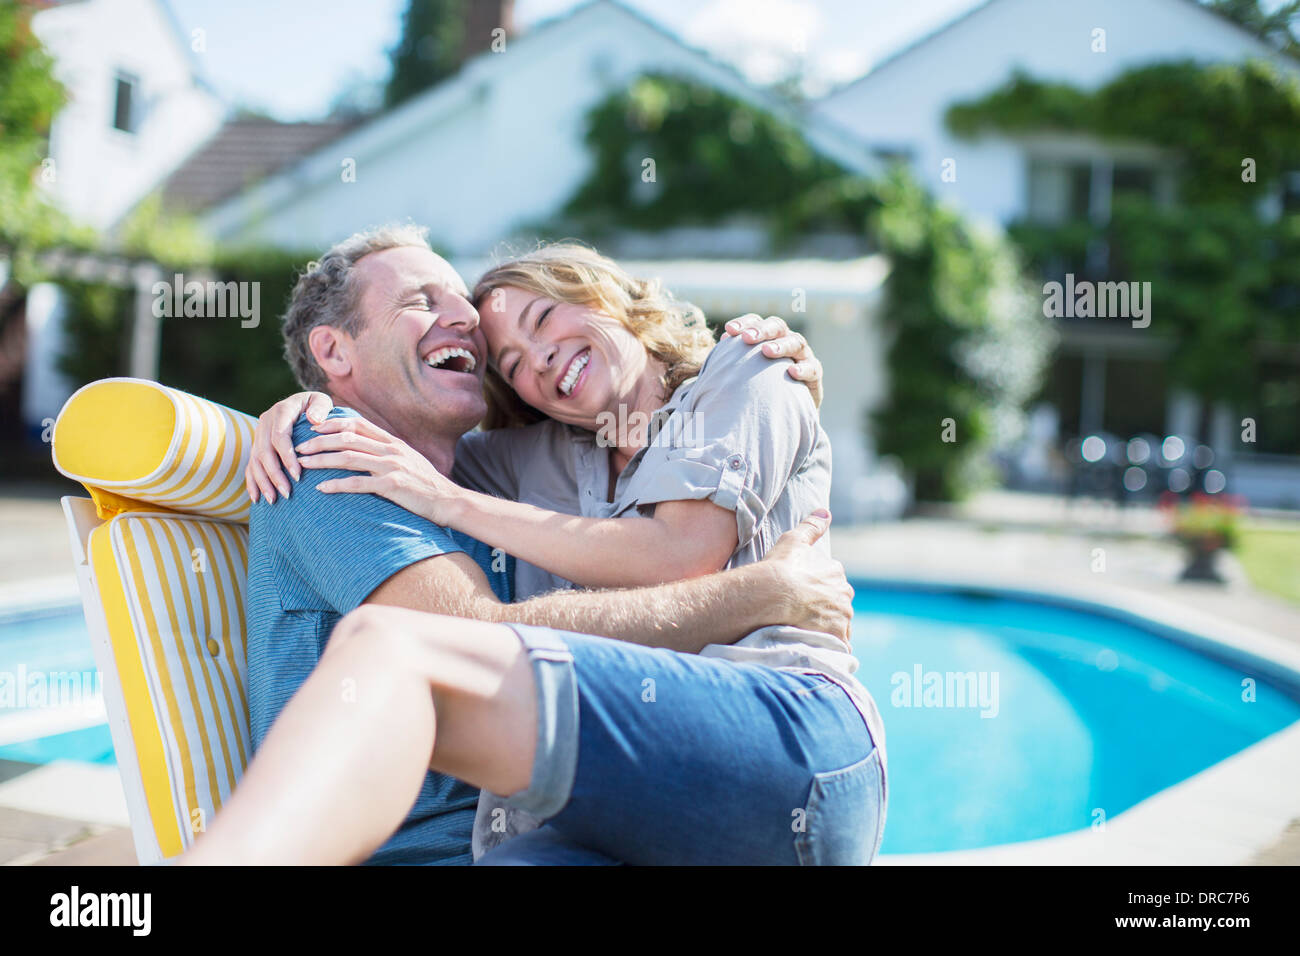 Couple relaxing in lounge chair at poolside Stock Photo